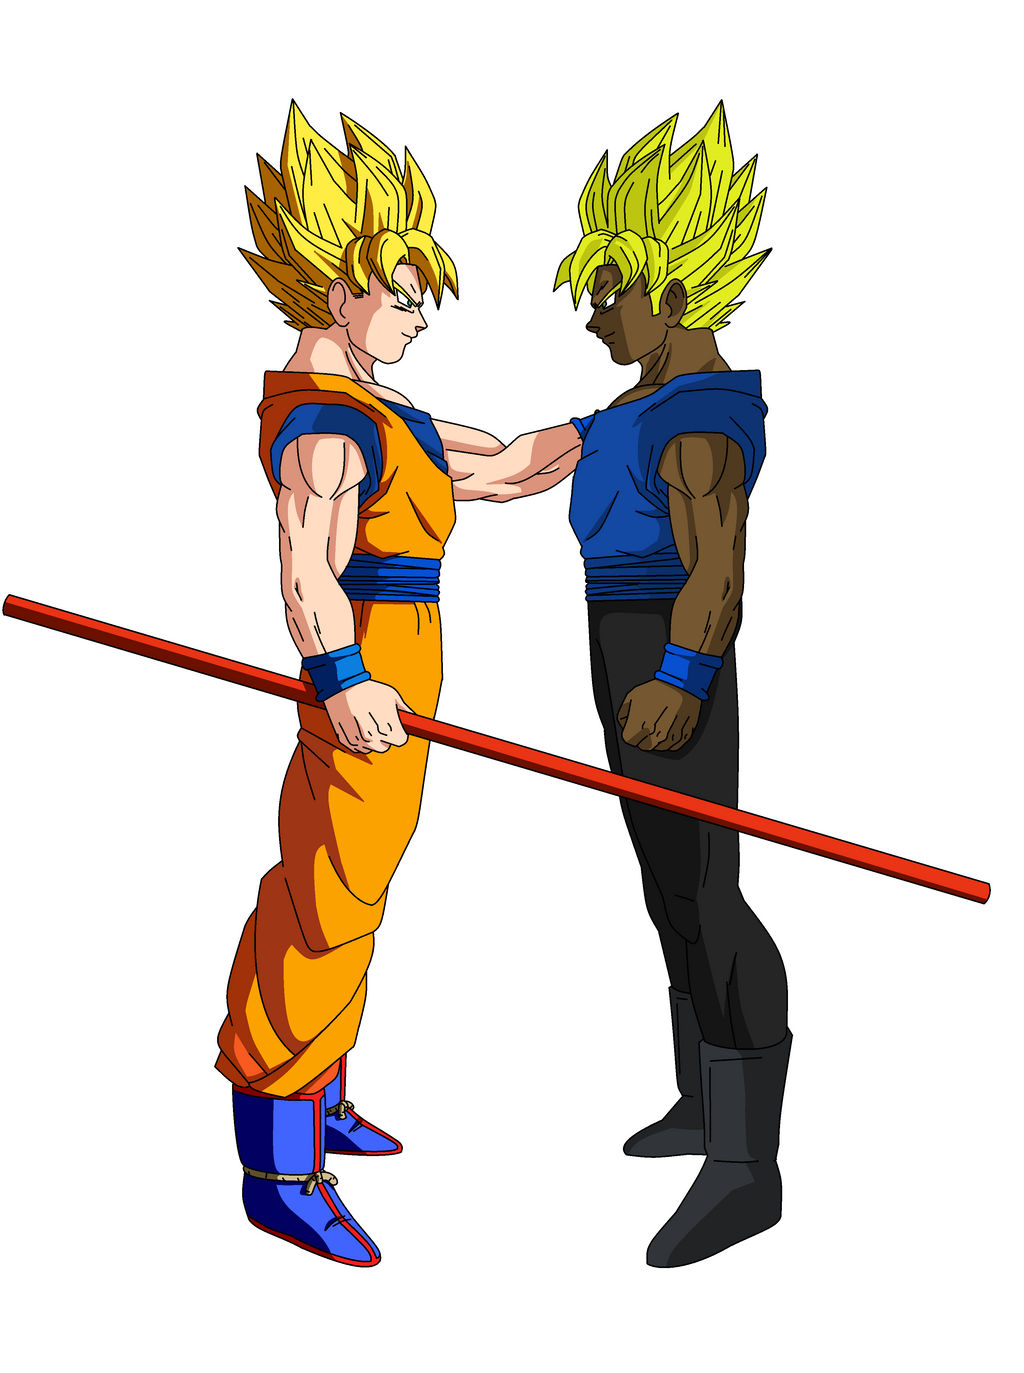 Universe H/ZX vs Universe 6 by WOLFBLADE111 on DeviantArt